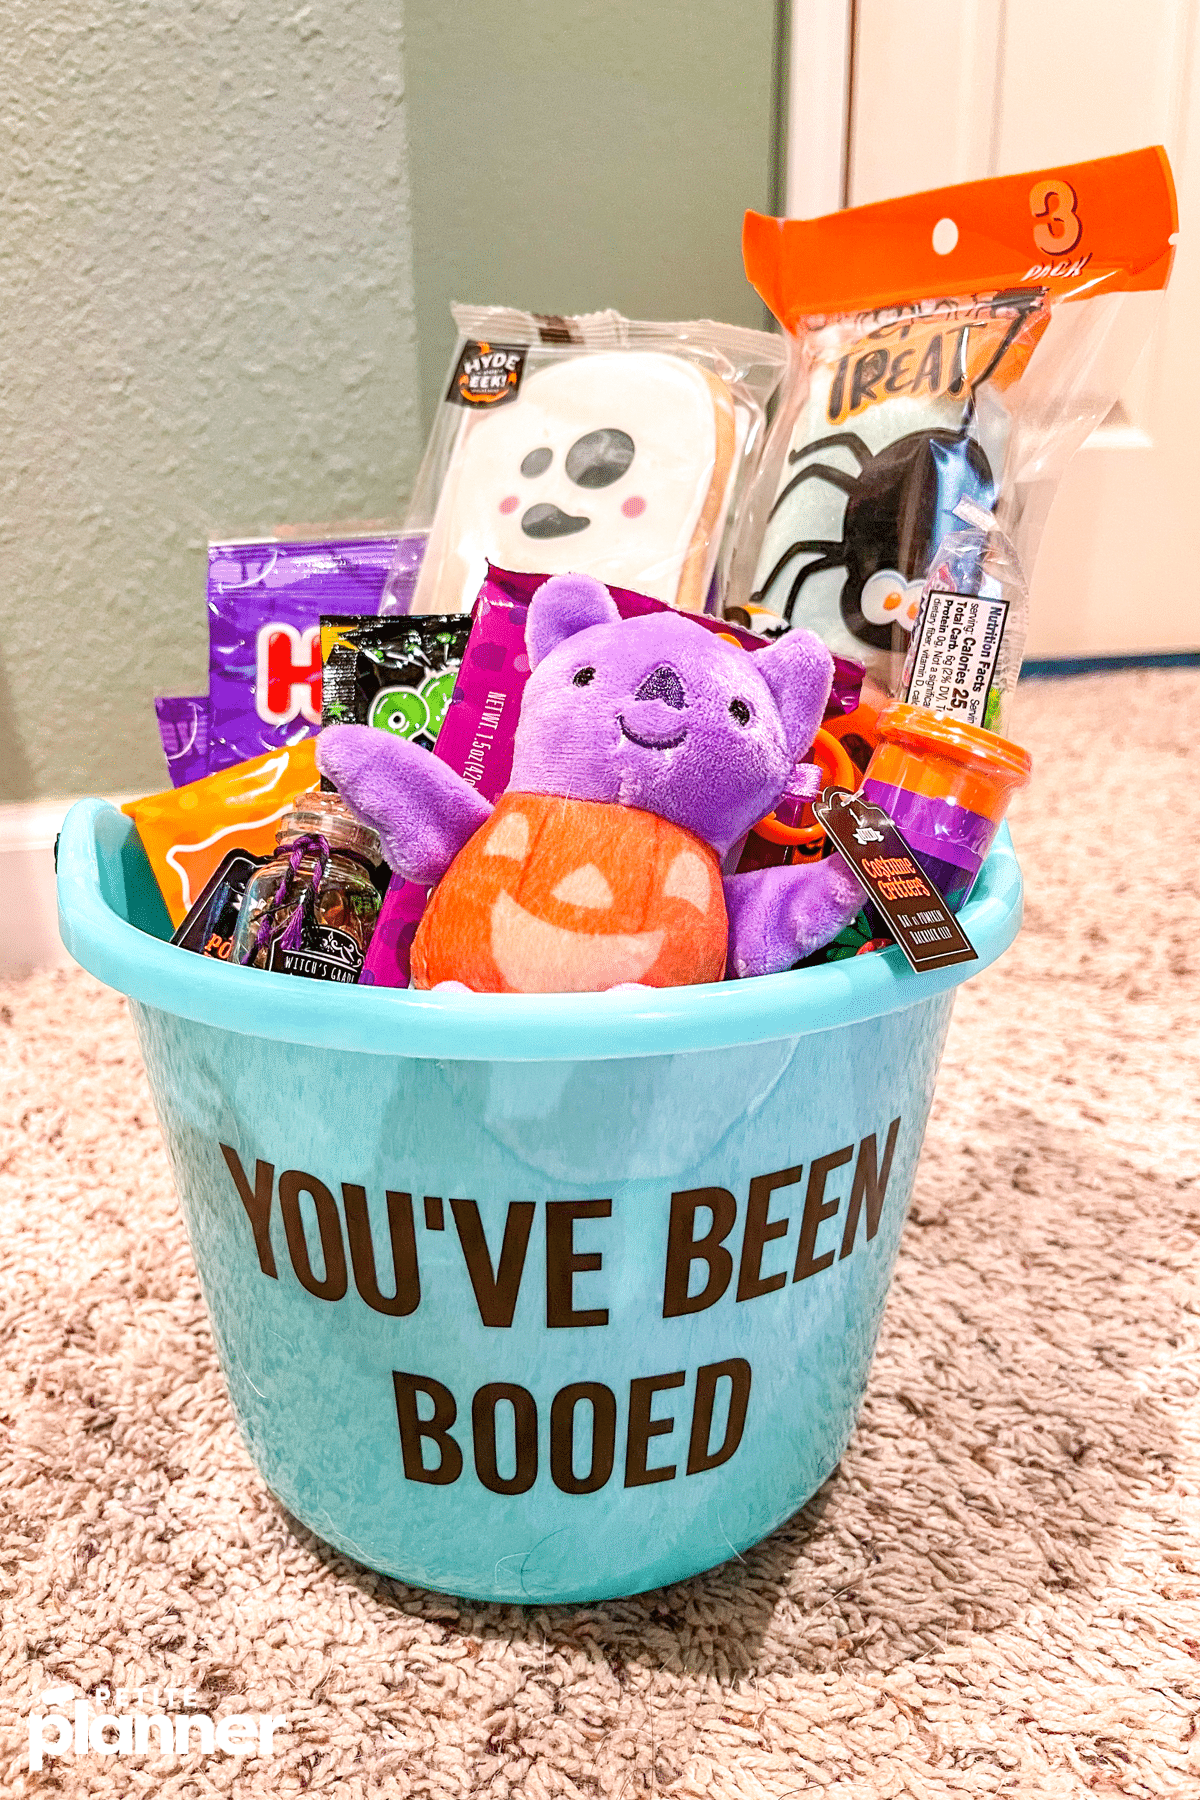 You've Been Booed Basket for Halloween